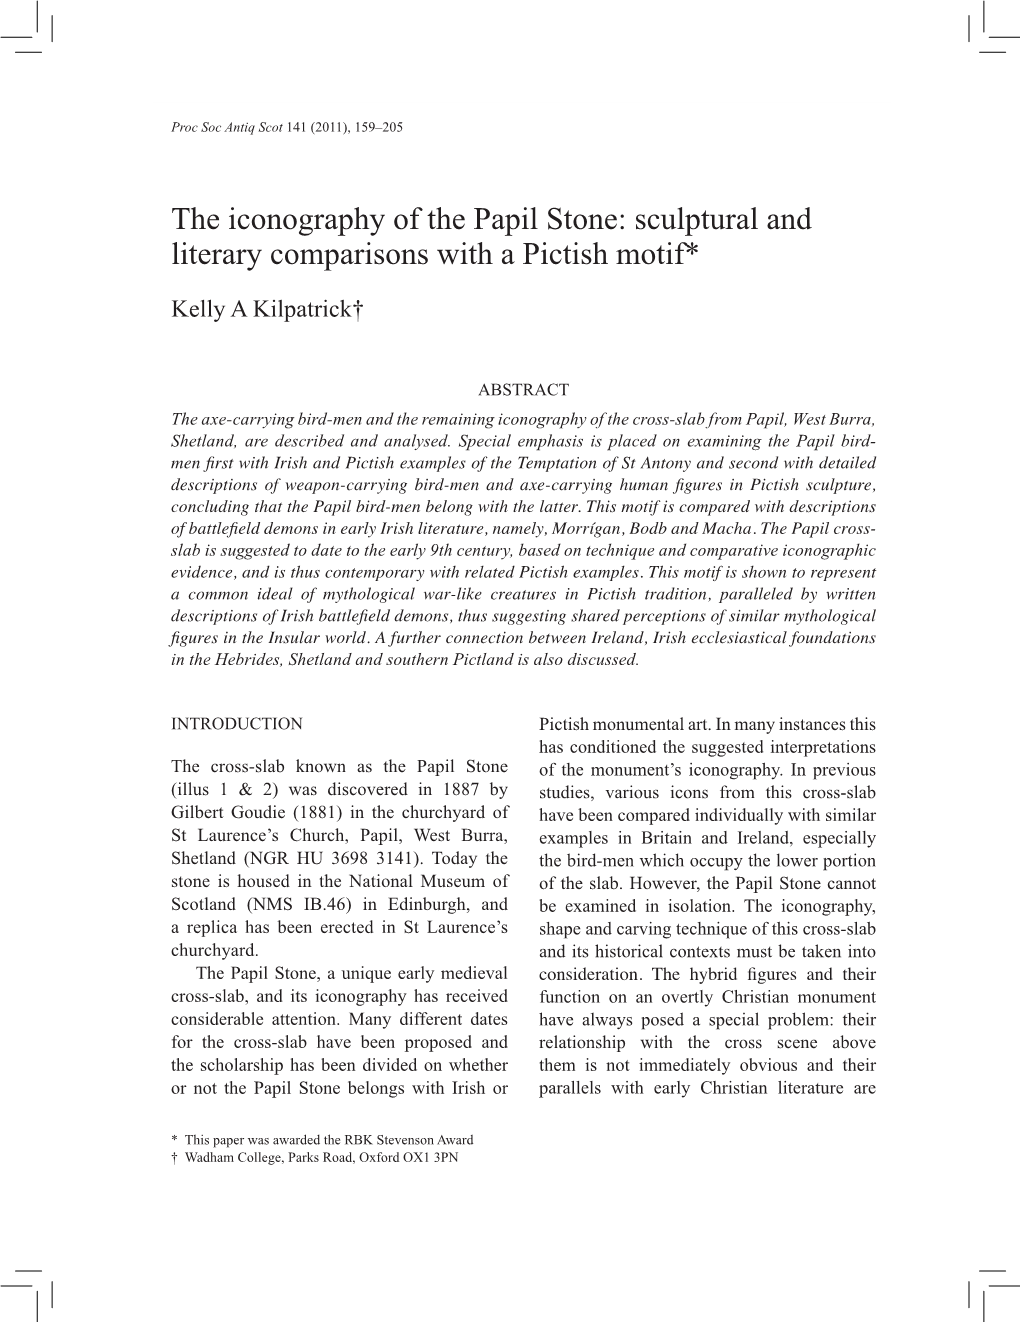 The Iconography of the Papil Stone: Sculptural and Literary Comparisons with a Pictish Motif*